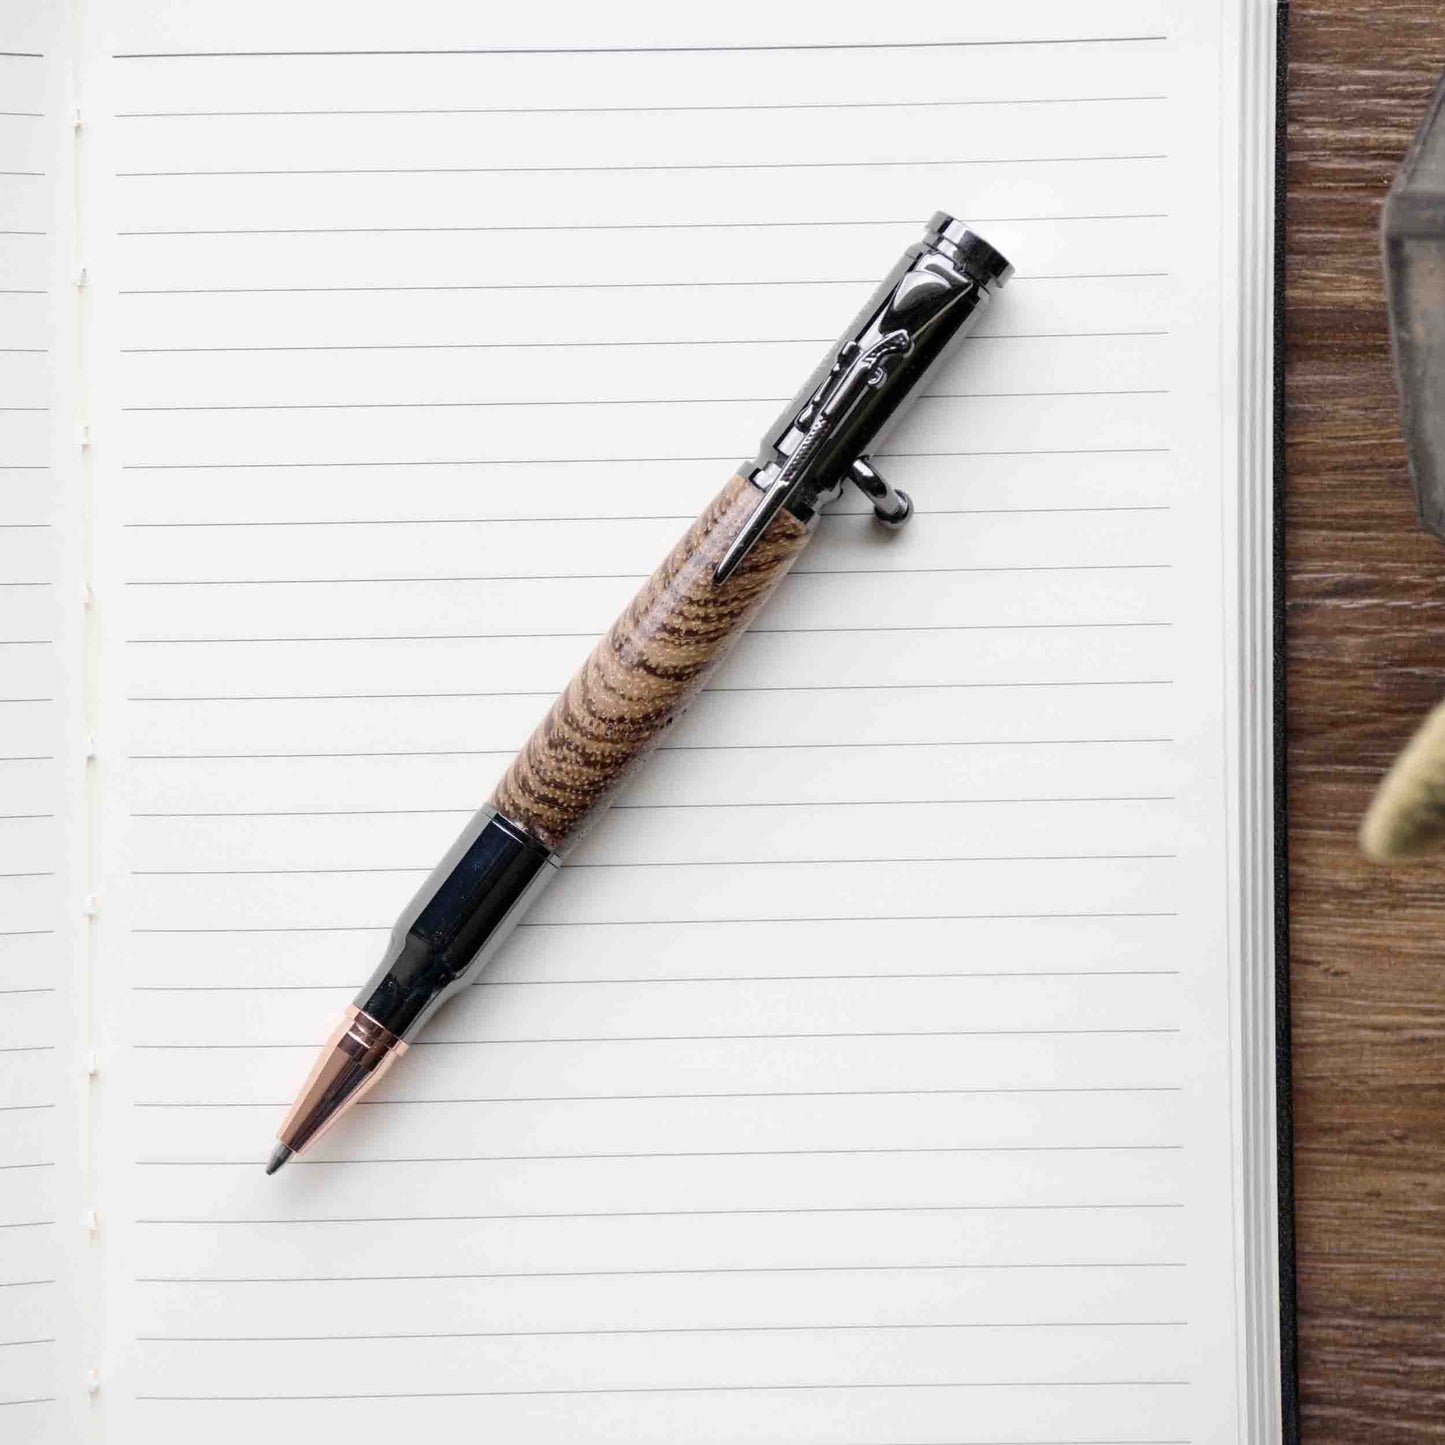 Zebrawood Bolt Action Pen by Autumn Woods Co, photographed against a white journal page